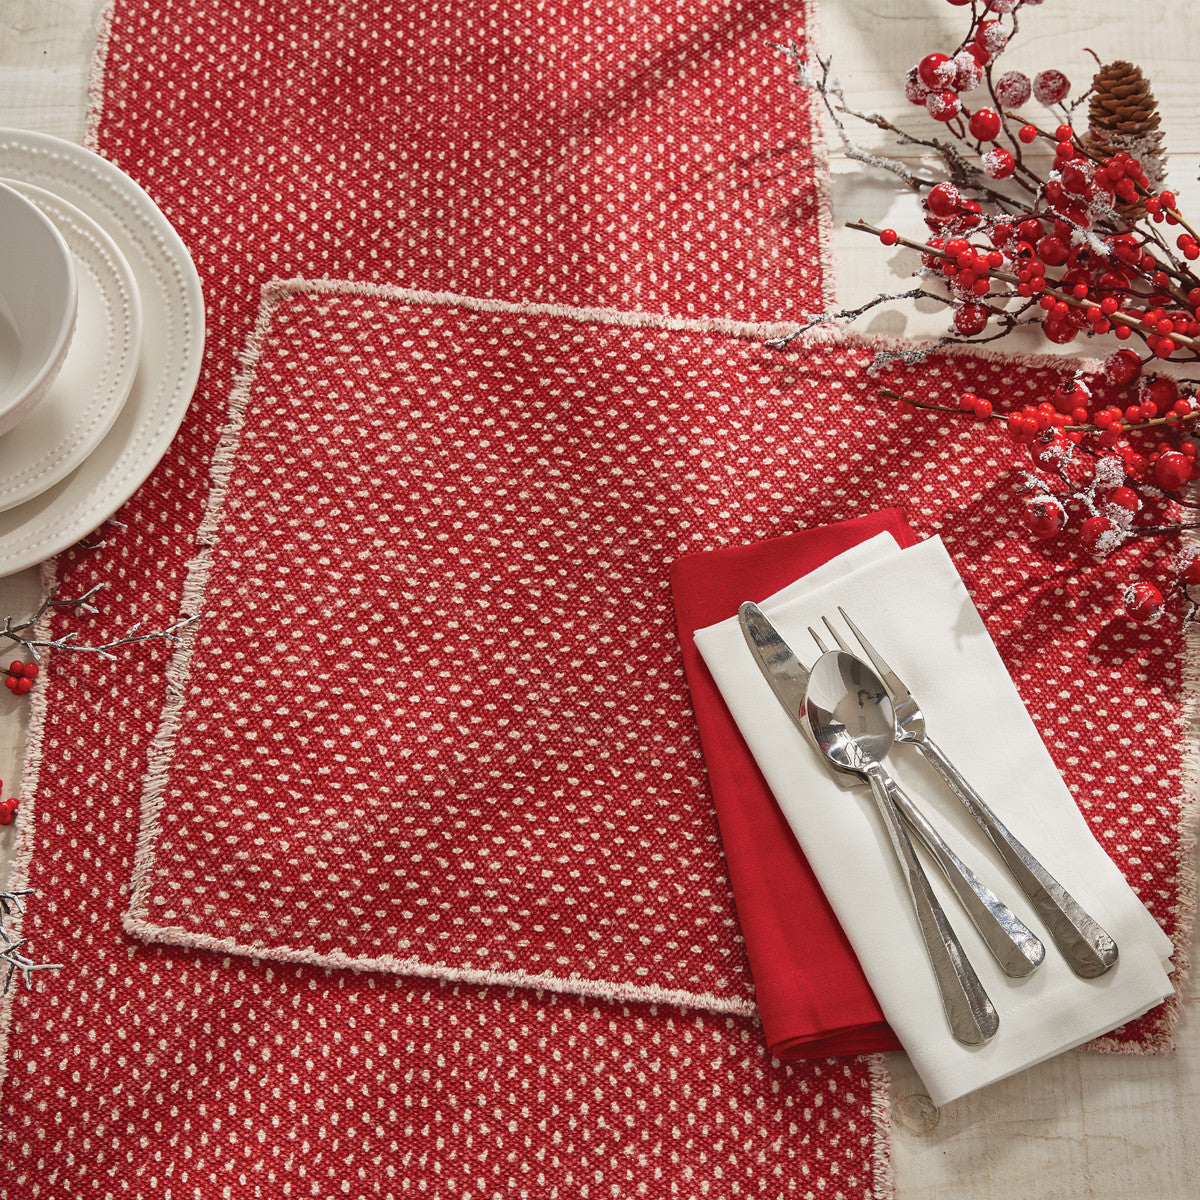 Mini Dots Printed Table Runner - 72"L Red Park Designs